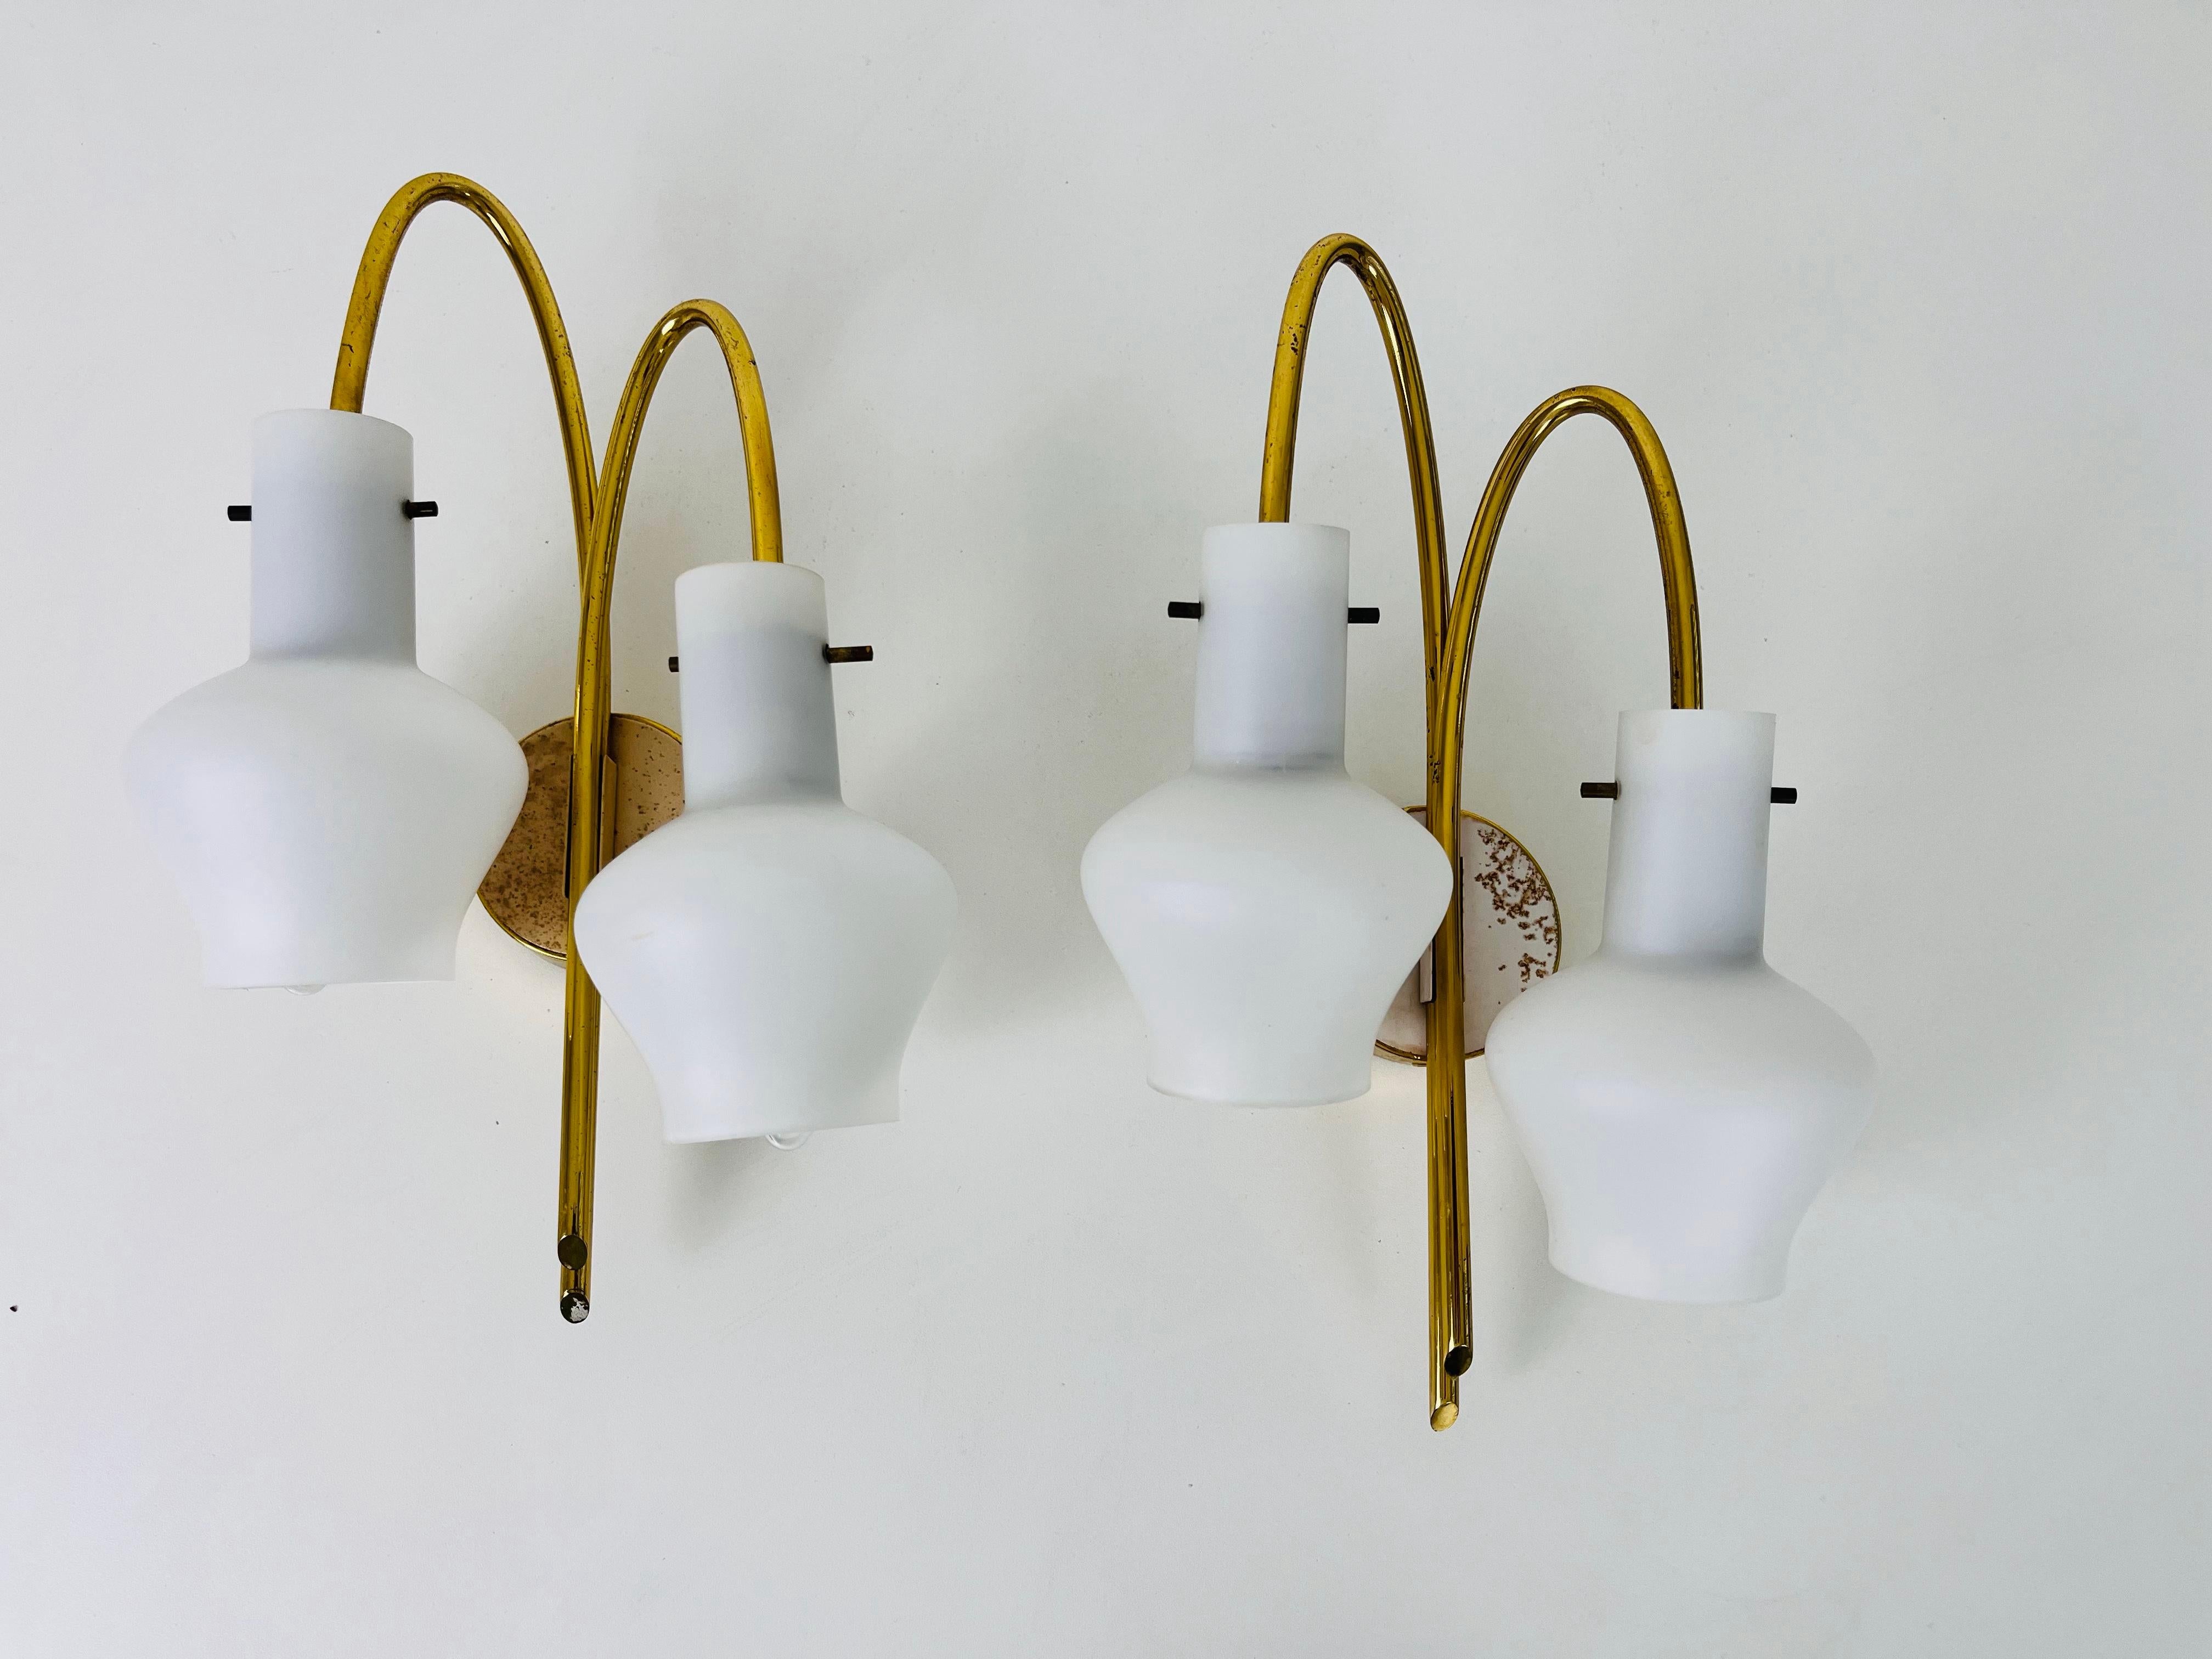 A pair of Italian Stilnovo style wall lamps made in the 1960s. It is fascinating with its rare opaline glass shade. The body of the lamp is made of brass 

The lights require E14 light bulbs. Works with both 120/220V. Very good vintage